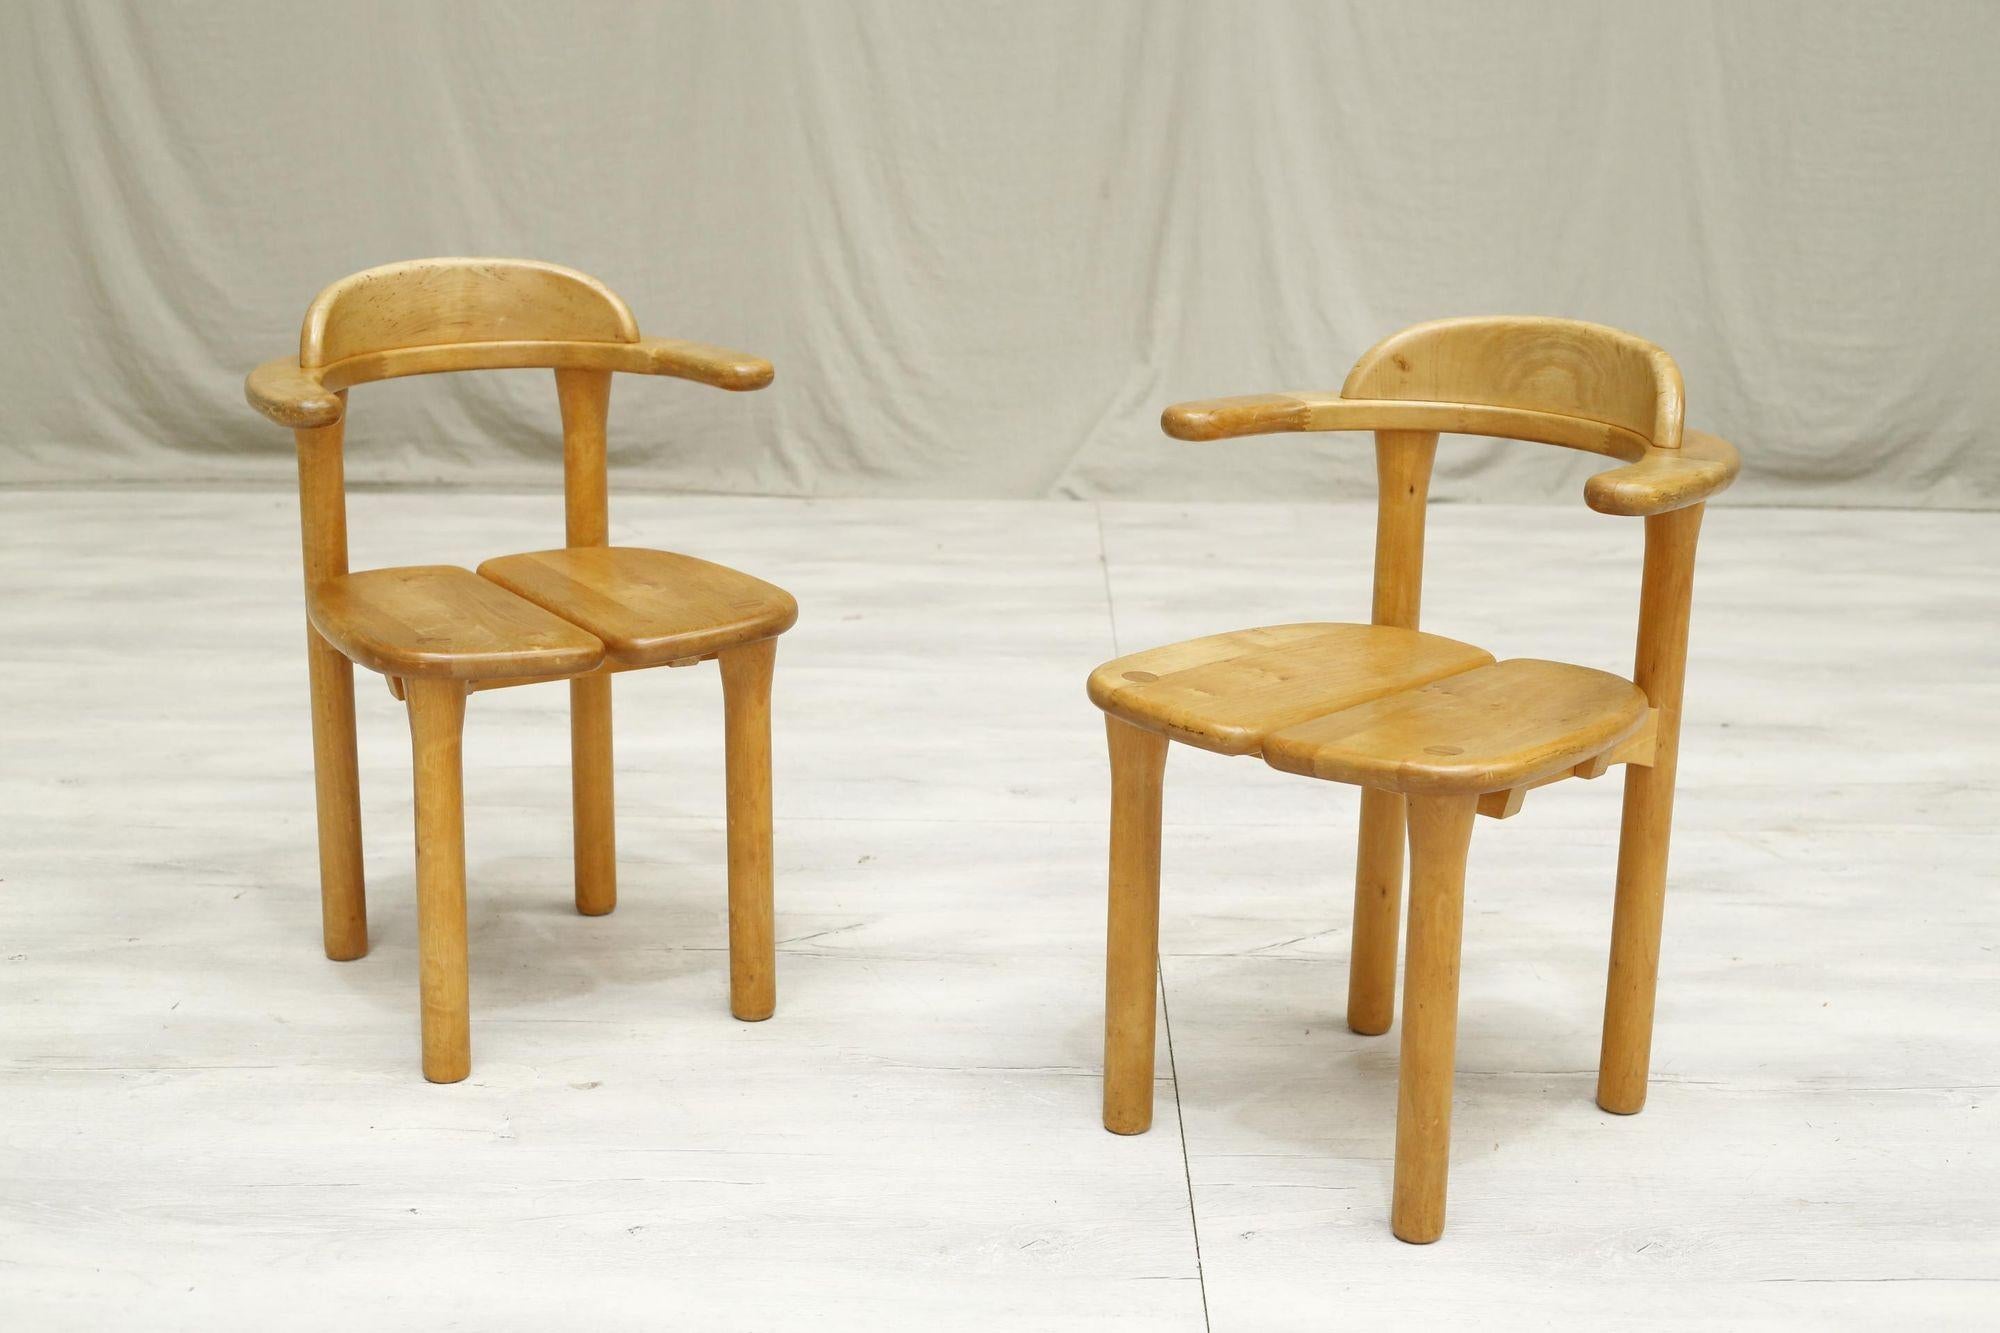 These are a very stylish pair of solid wood desk chairs by Austrian design company team 7.

Team 7 was a company built on using sustainable materials to create proper furniture. This was a pioneering choice which has seen them survive still to